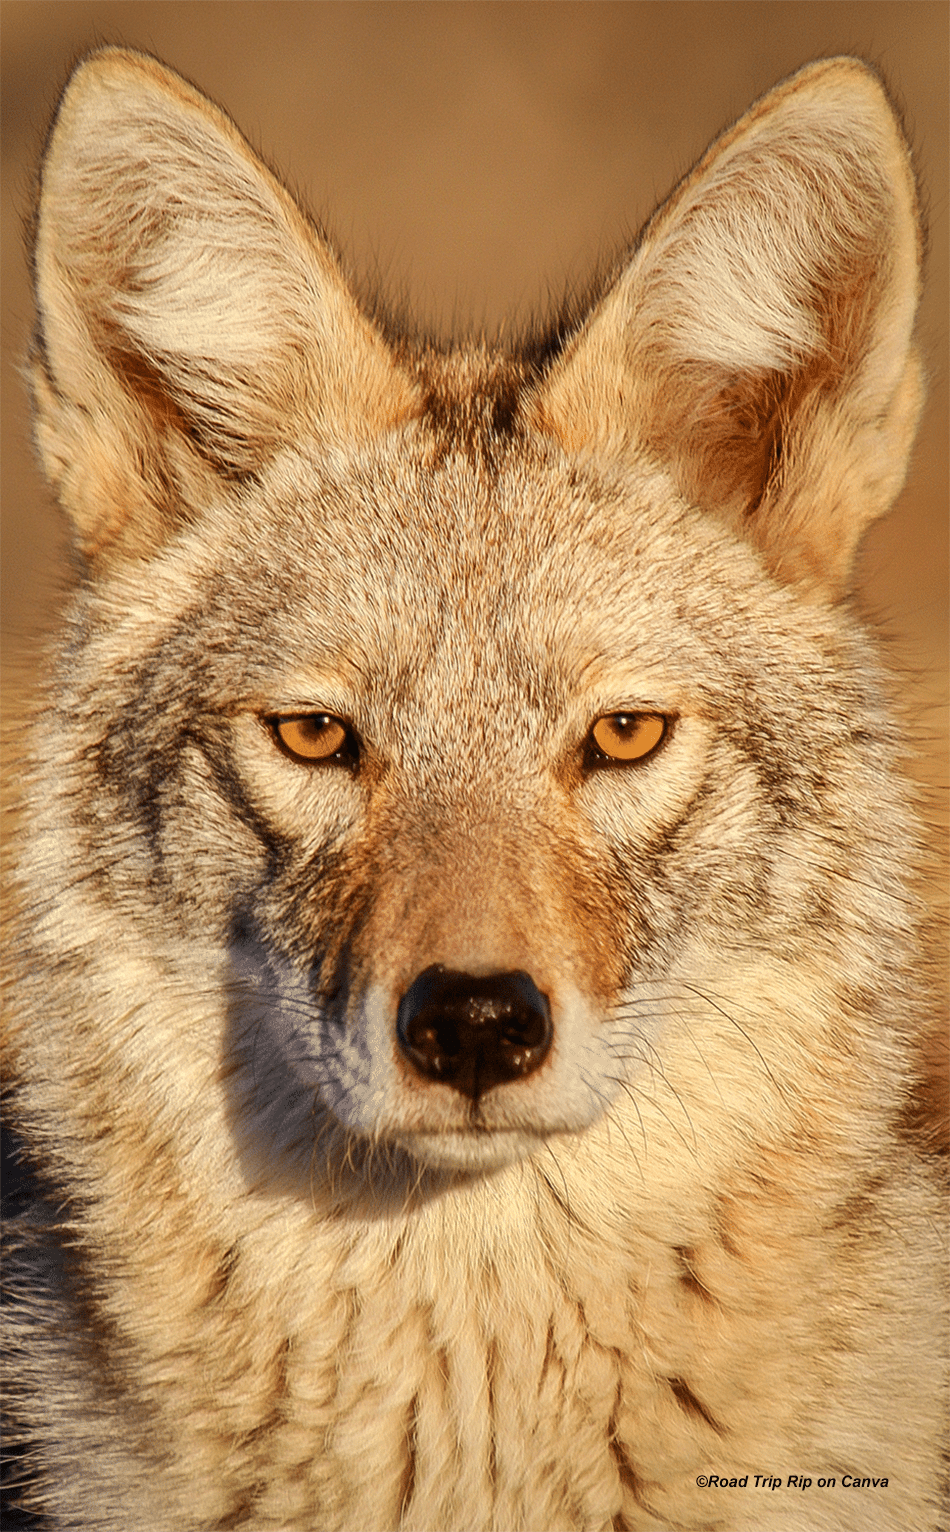 vertical image of a light colored coyote with orange eyes and big ears